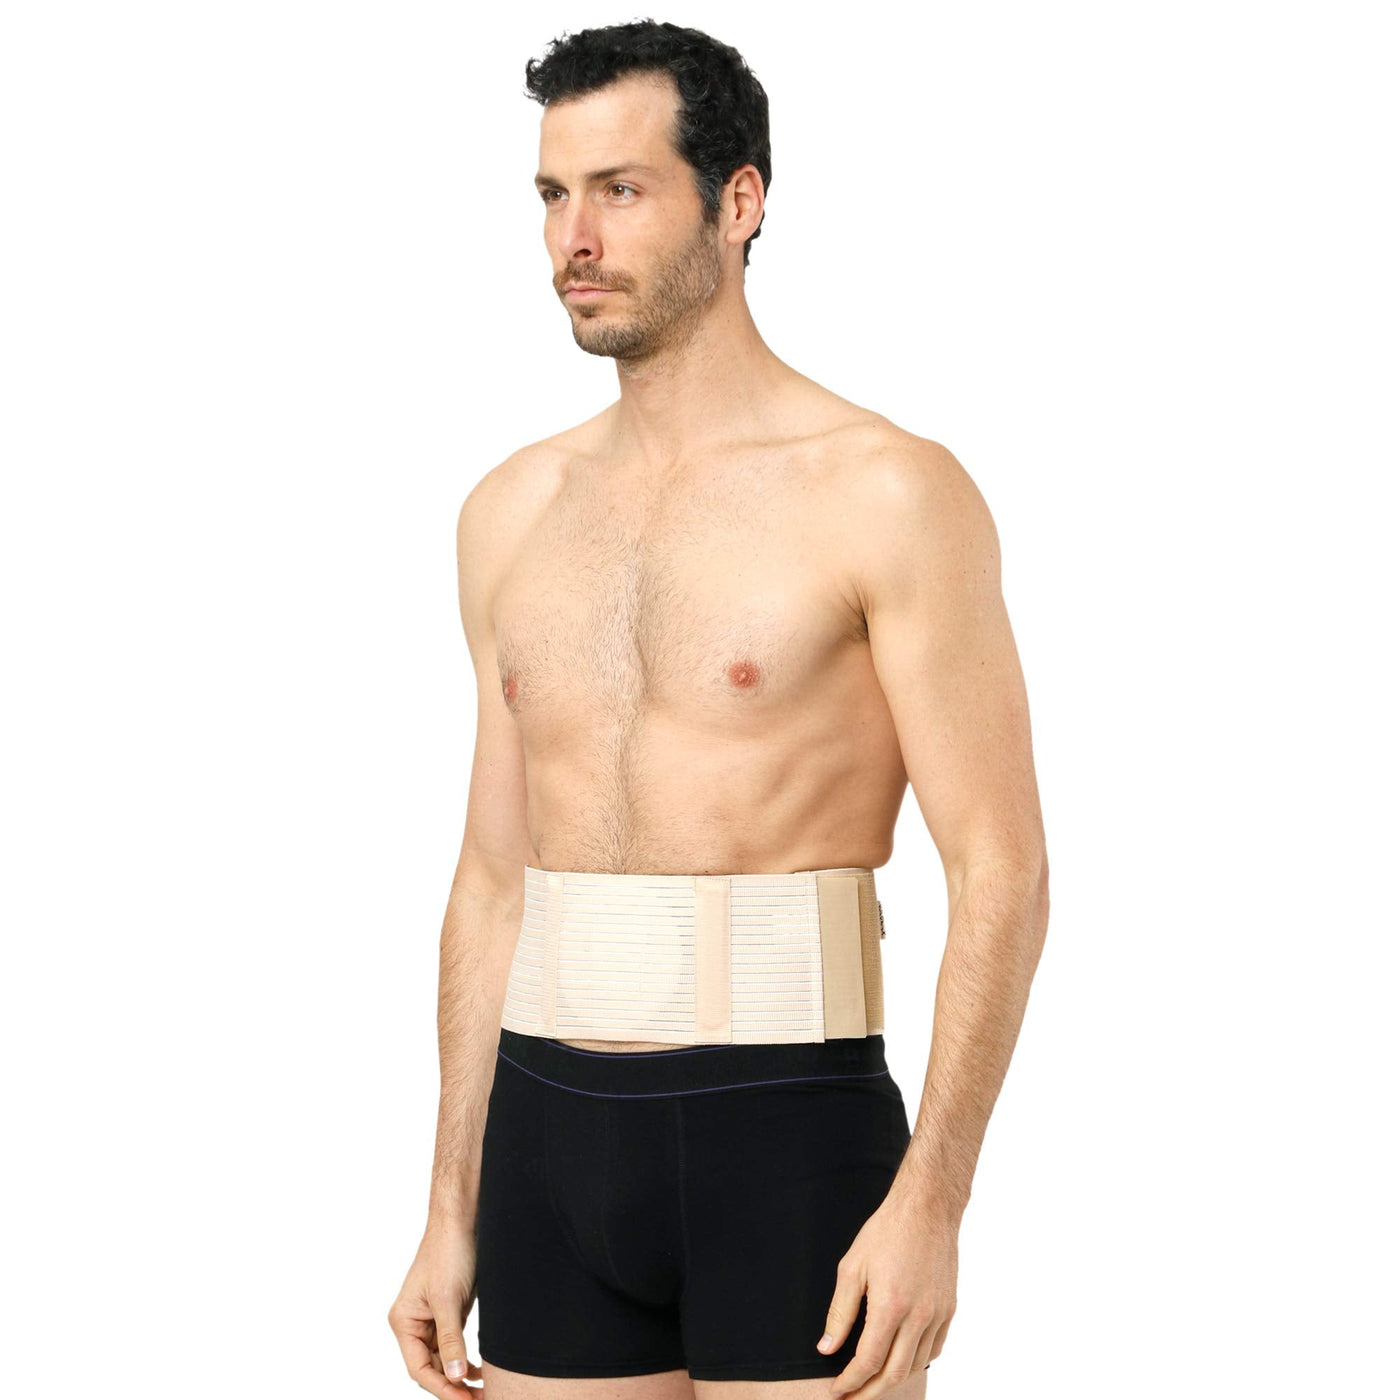 Umbilical Hernia Belt for Men and Women - Abdominal Support Binder with  Compression Pad - for Incisional, Epigastric, Ventral, Inguinal Hernia -  Belly Button Navel Hernia Support (XXL) 